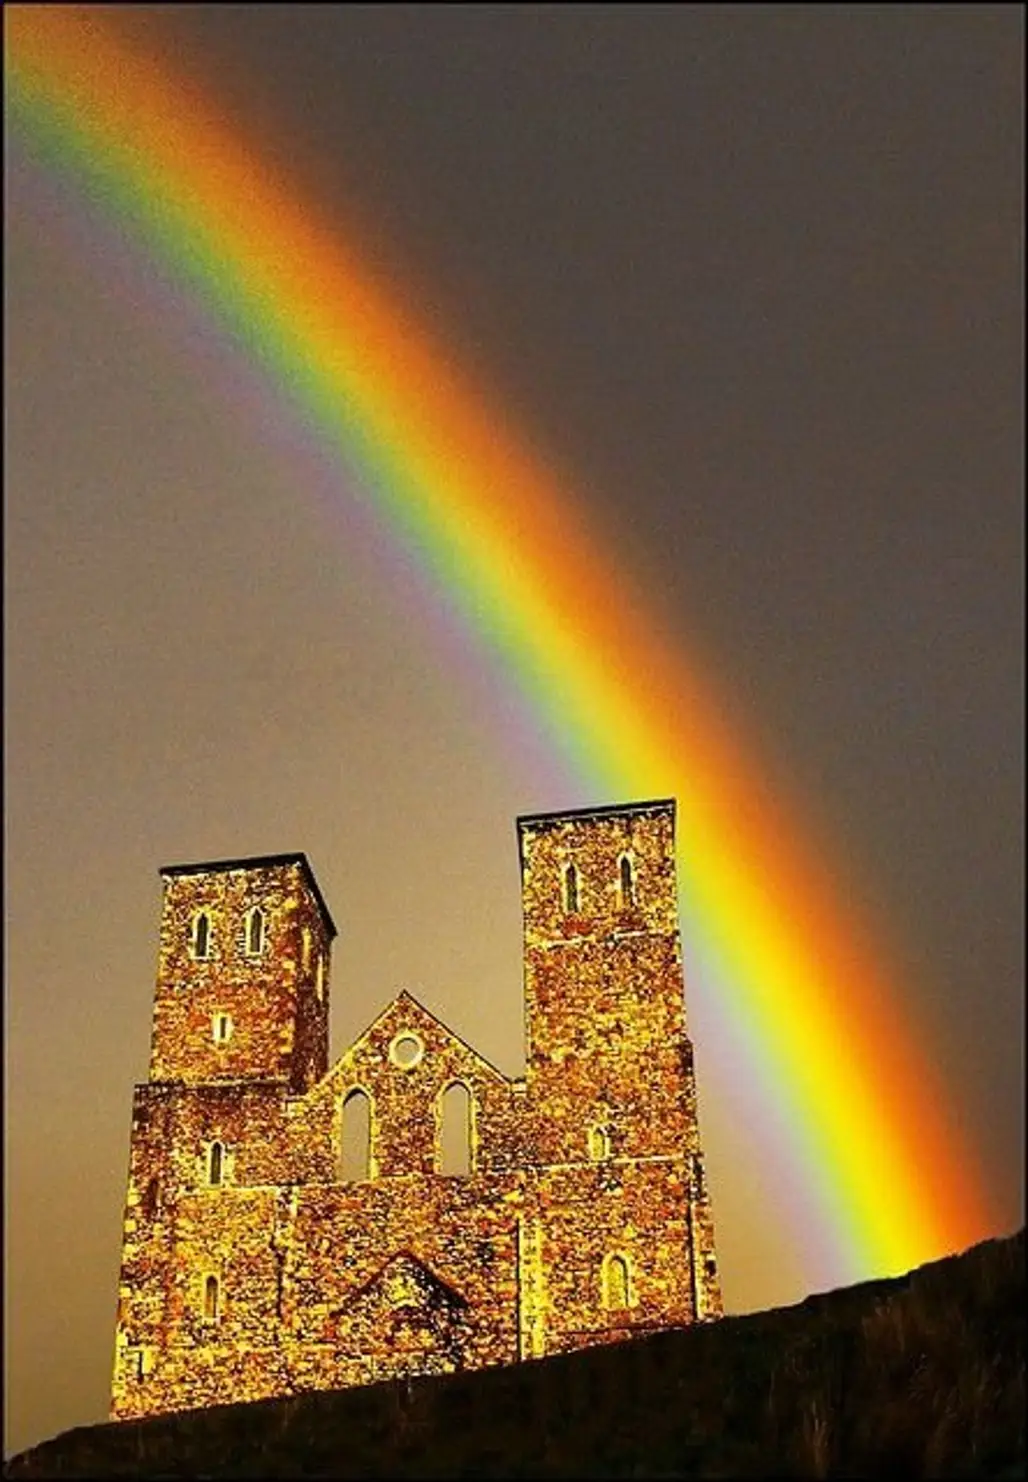 St. Mary's Church at Reculver Castle, England